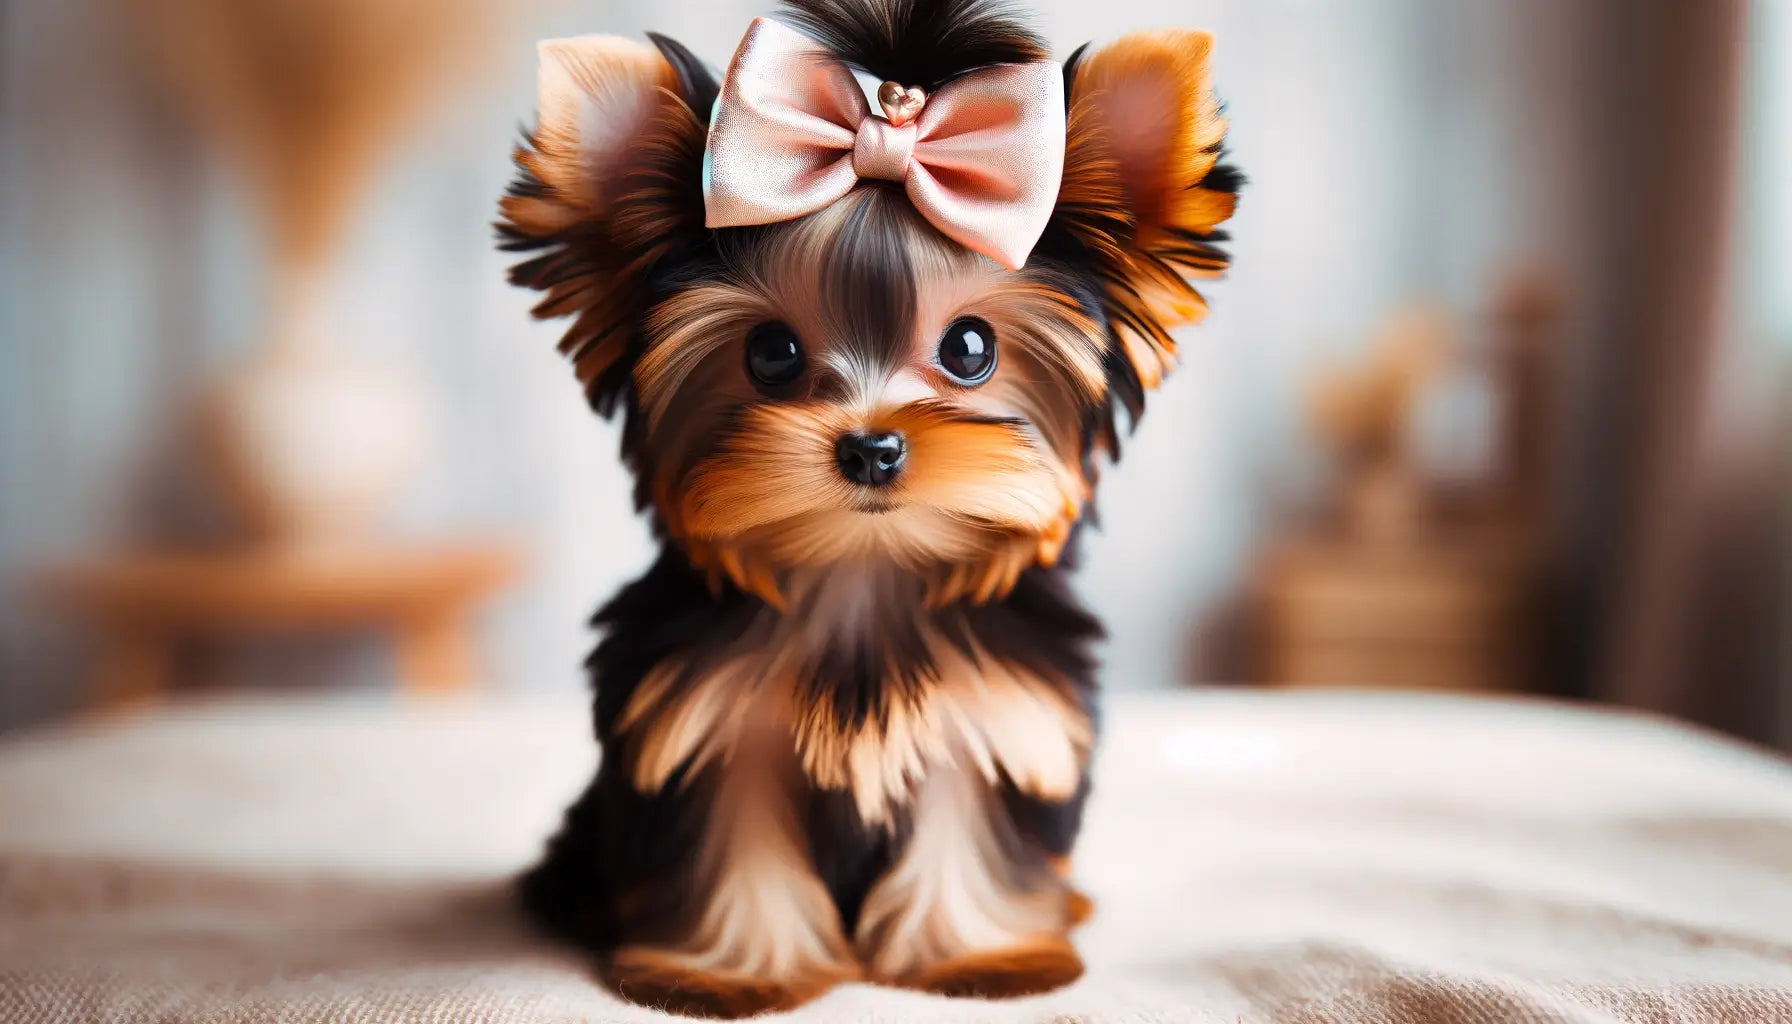 A Teacup Yorkie sits with a playful bow atop its head.